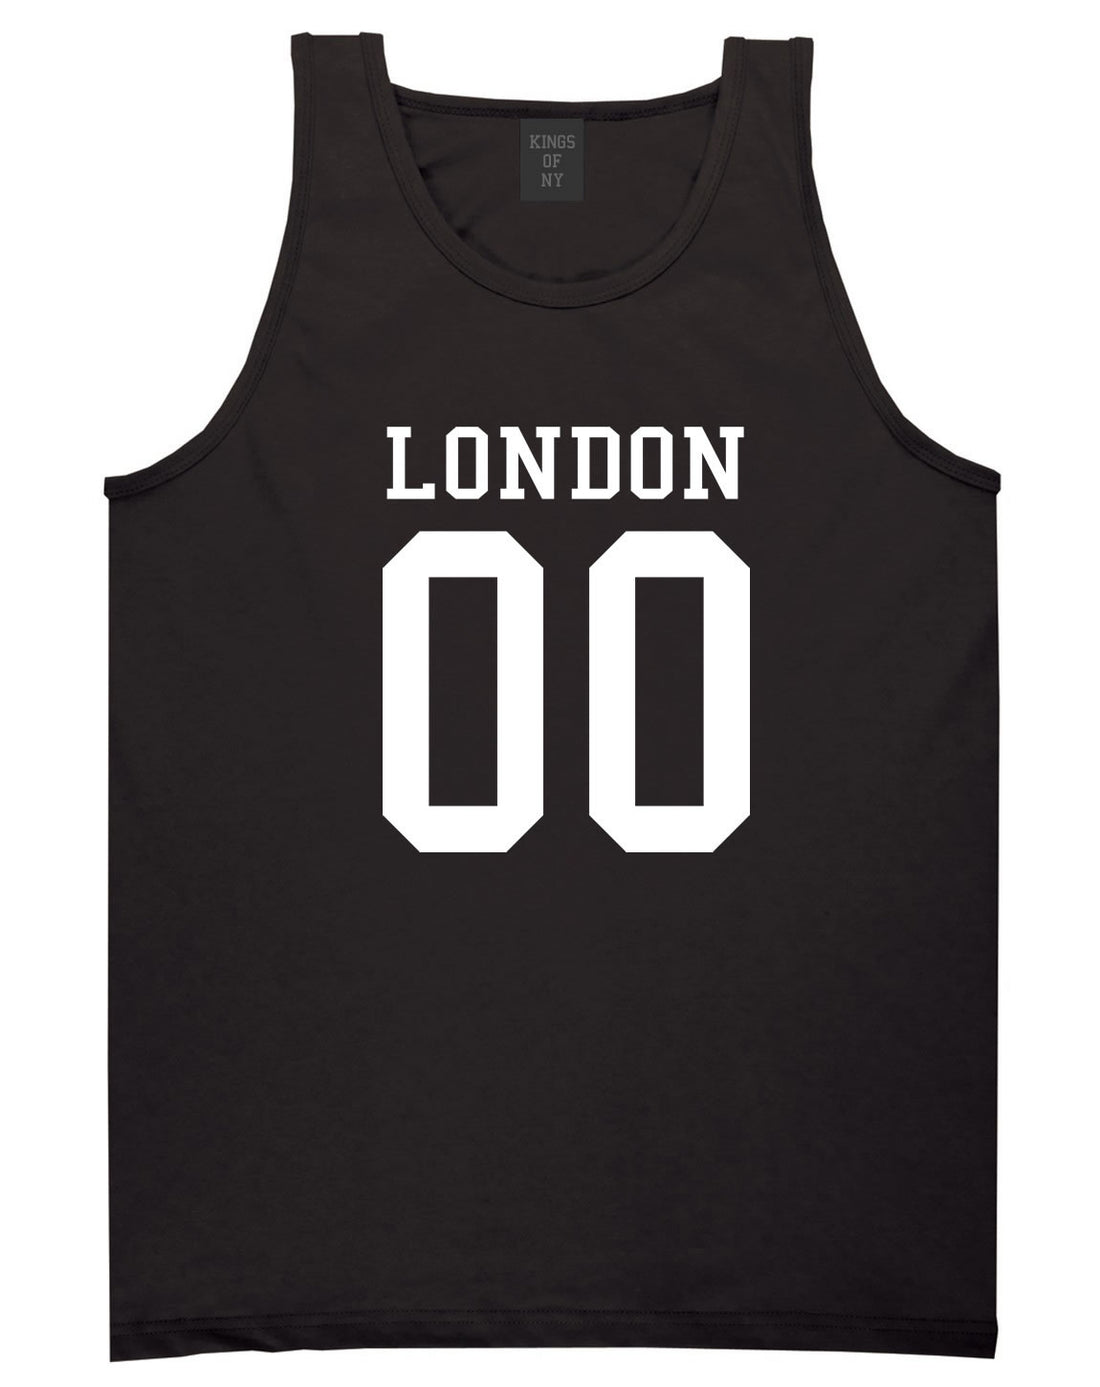 London Team 00 Jersey Tank Top in Black By Kings Of NY